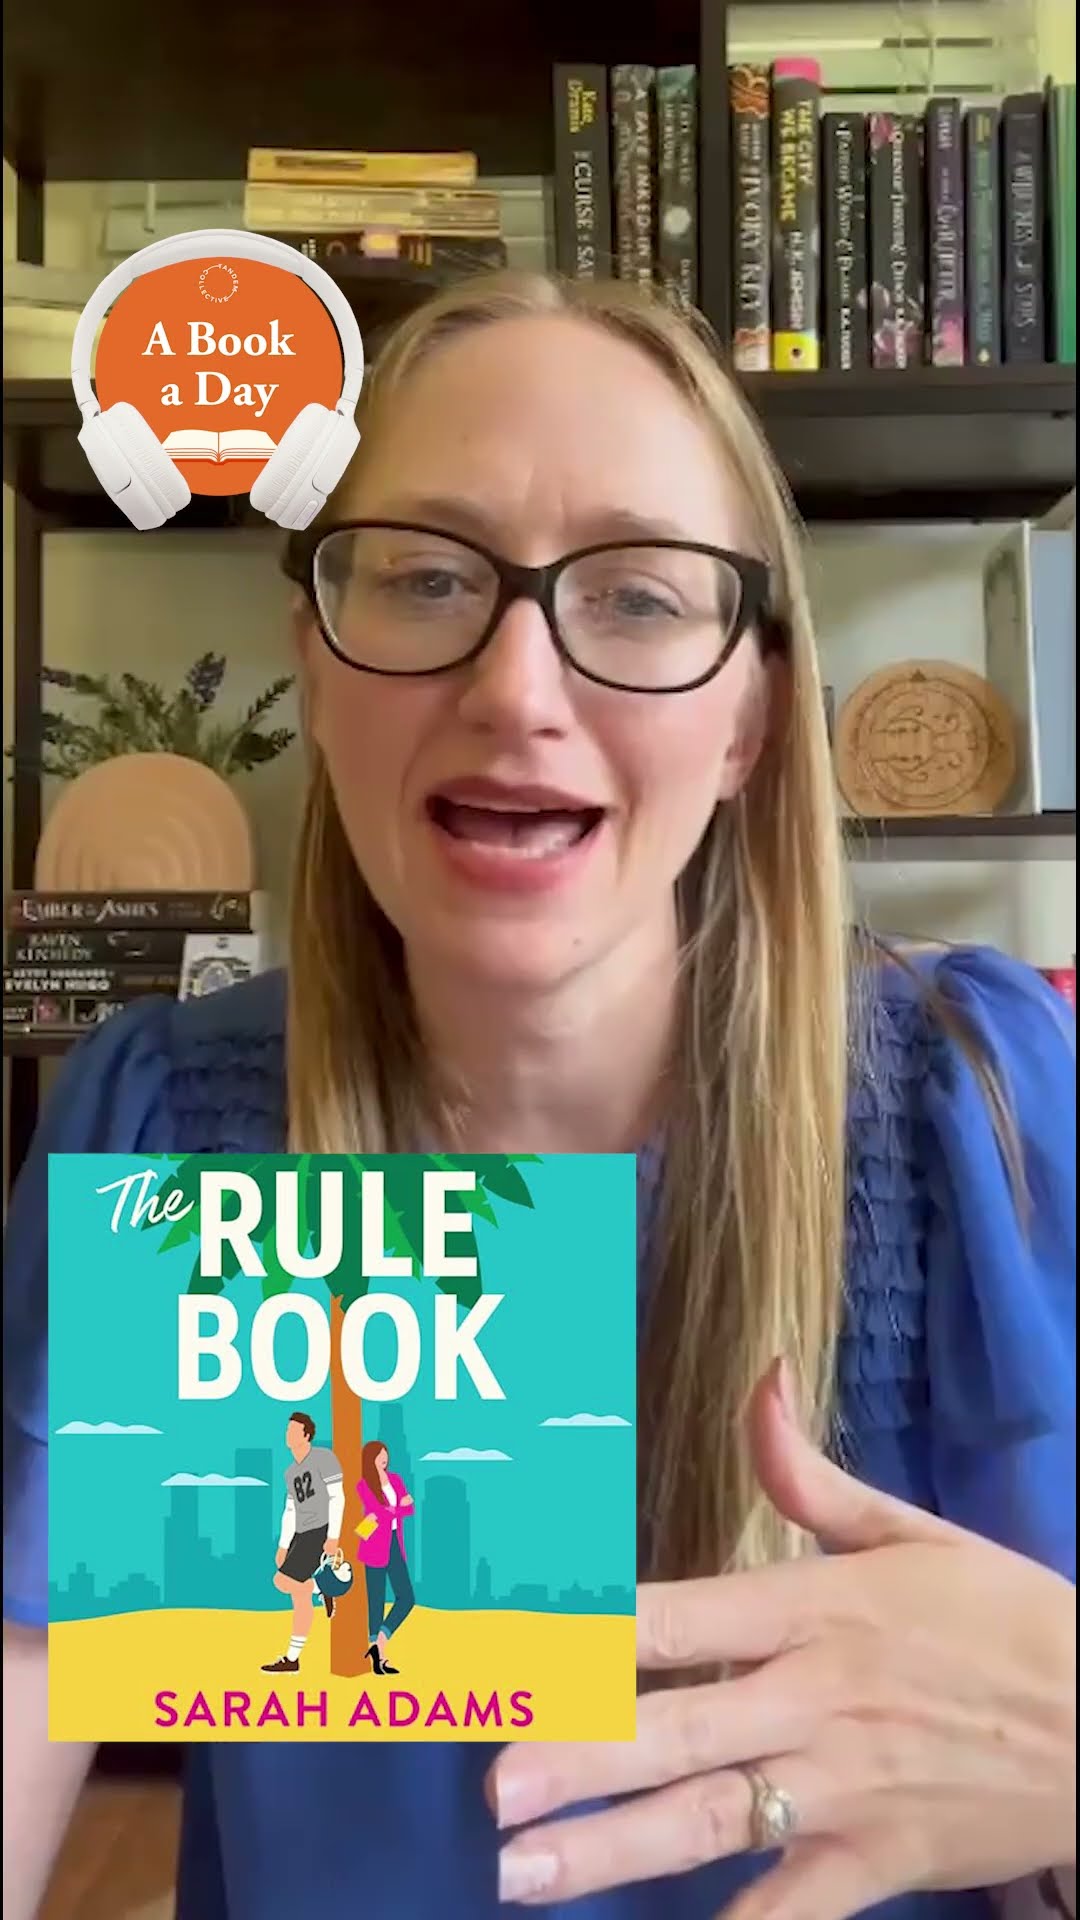 A Book a Day: The Rule Book by Sarah Adams